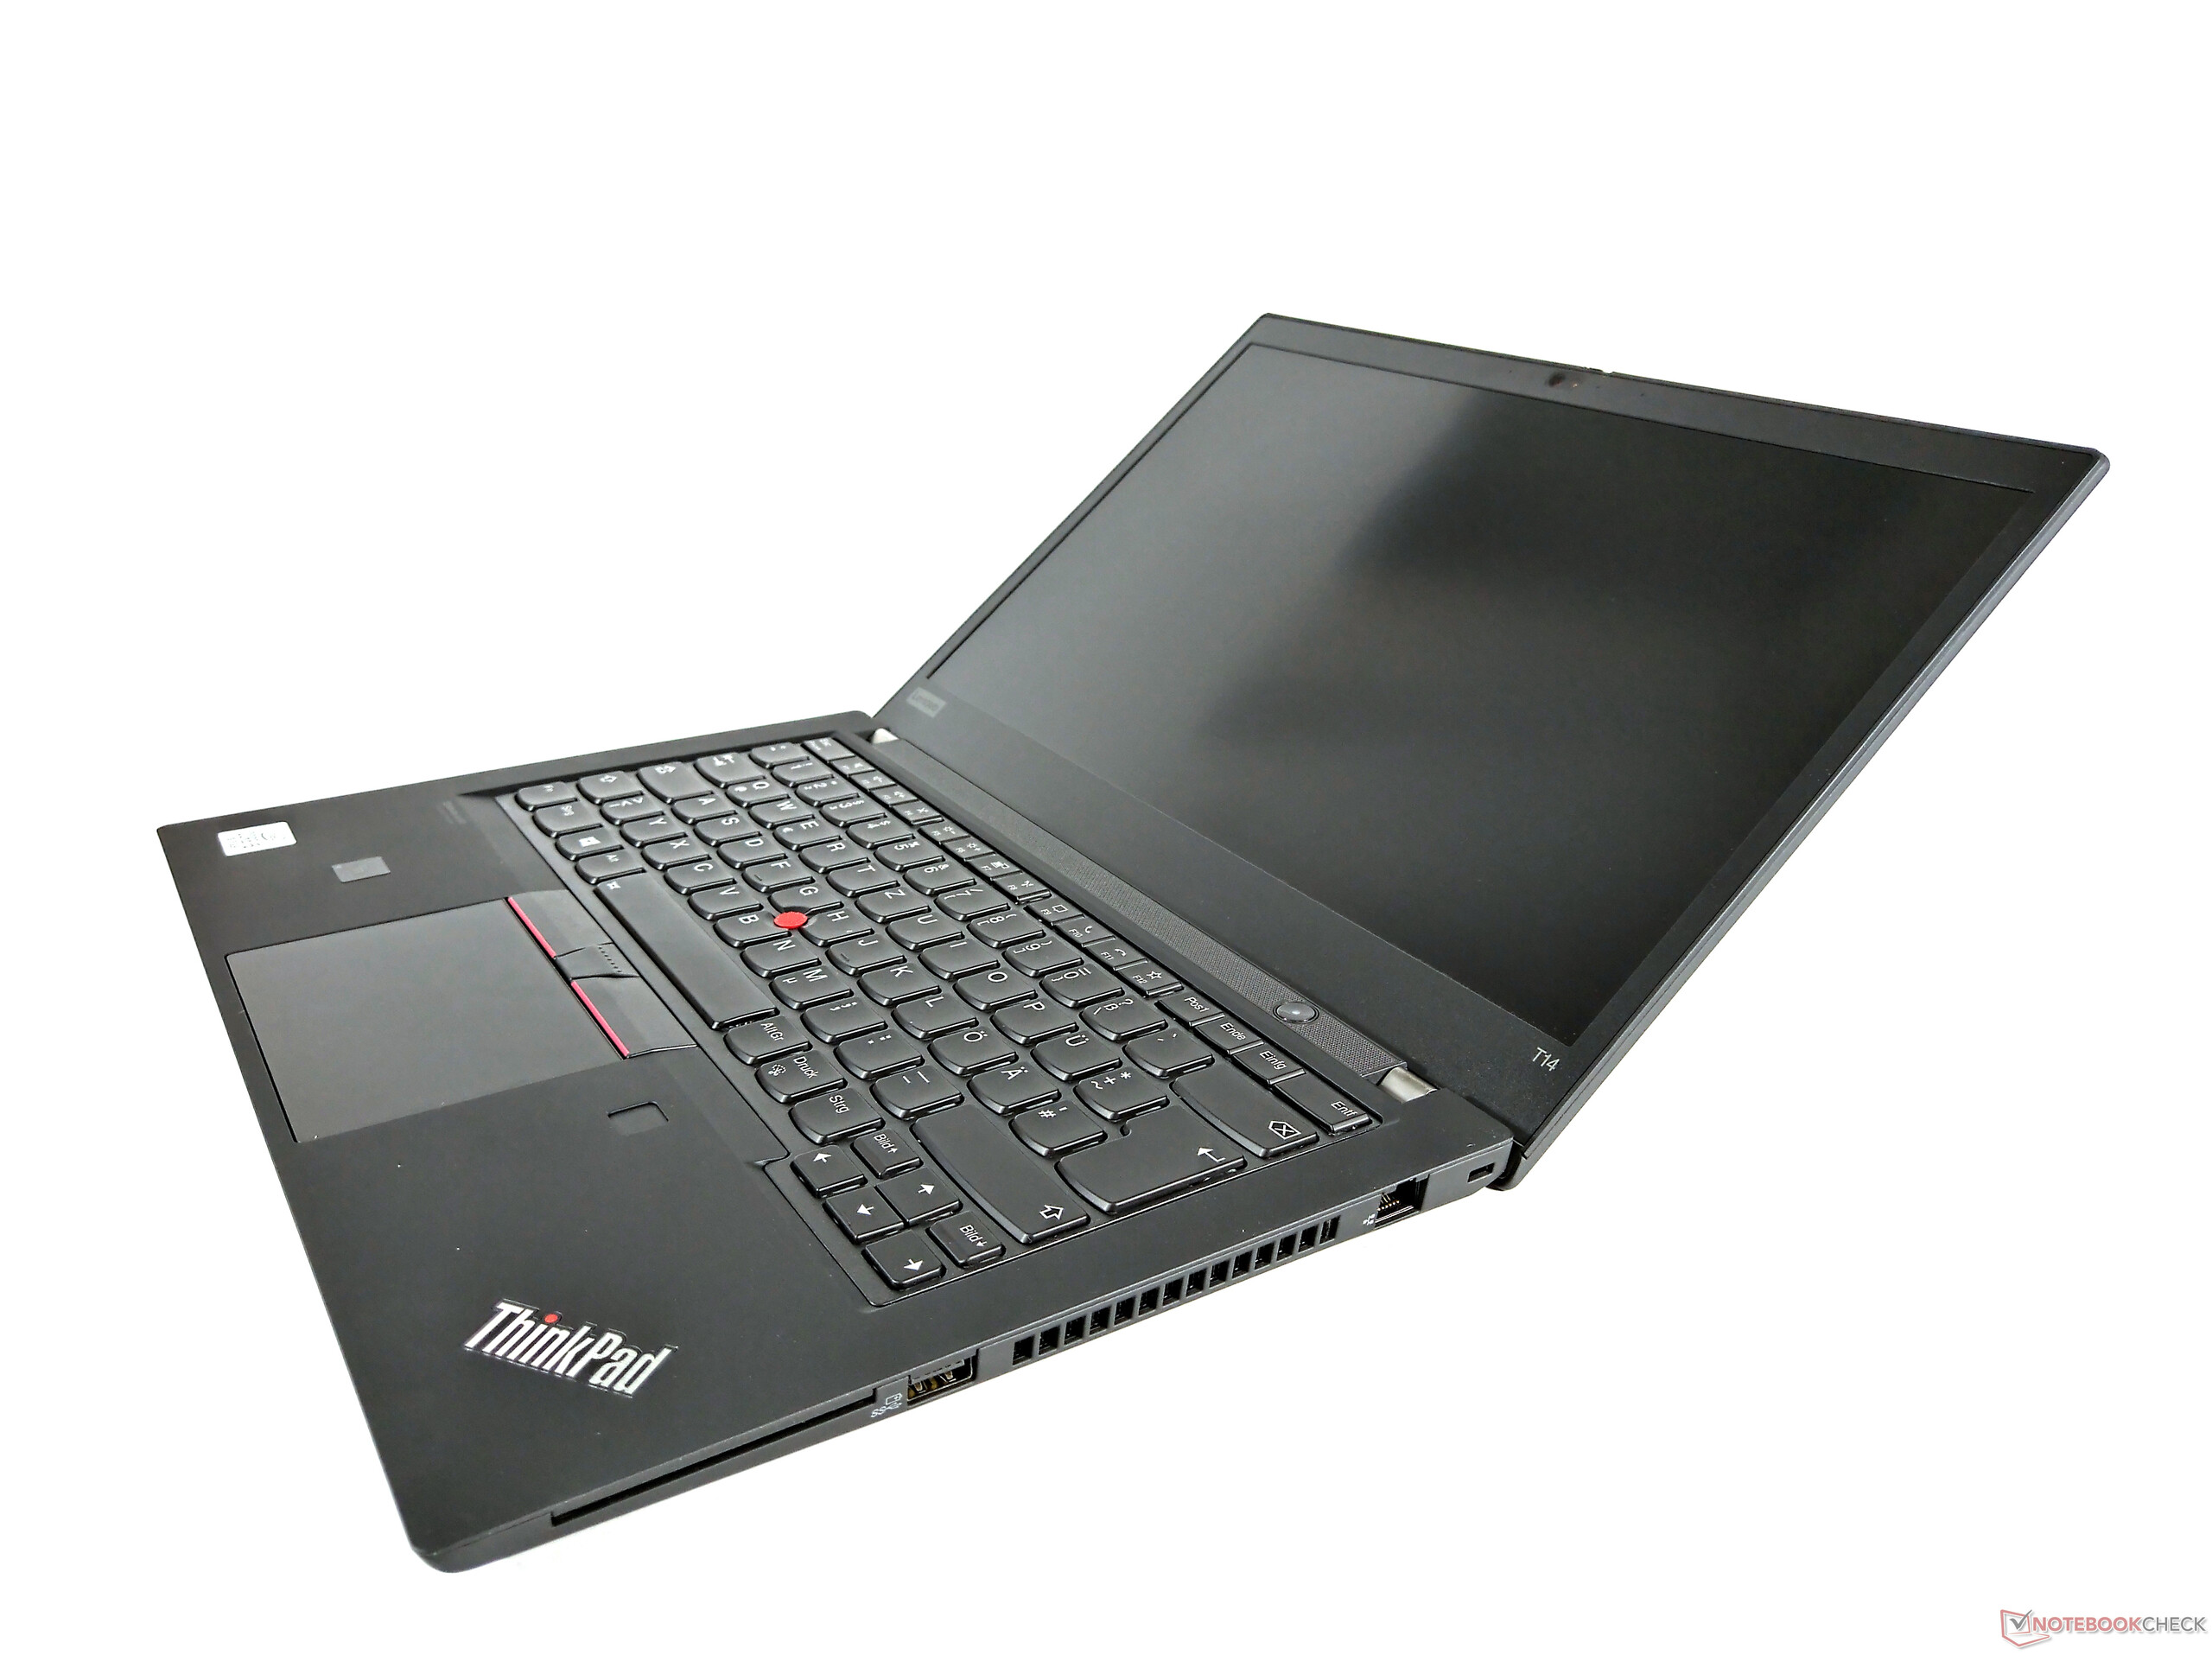 Lenovo ThinkPad T14 laptop review: Comet Lake update doesn't add much -   Reviews